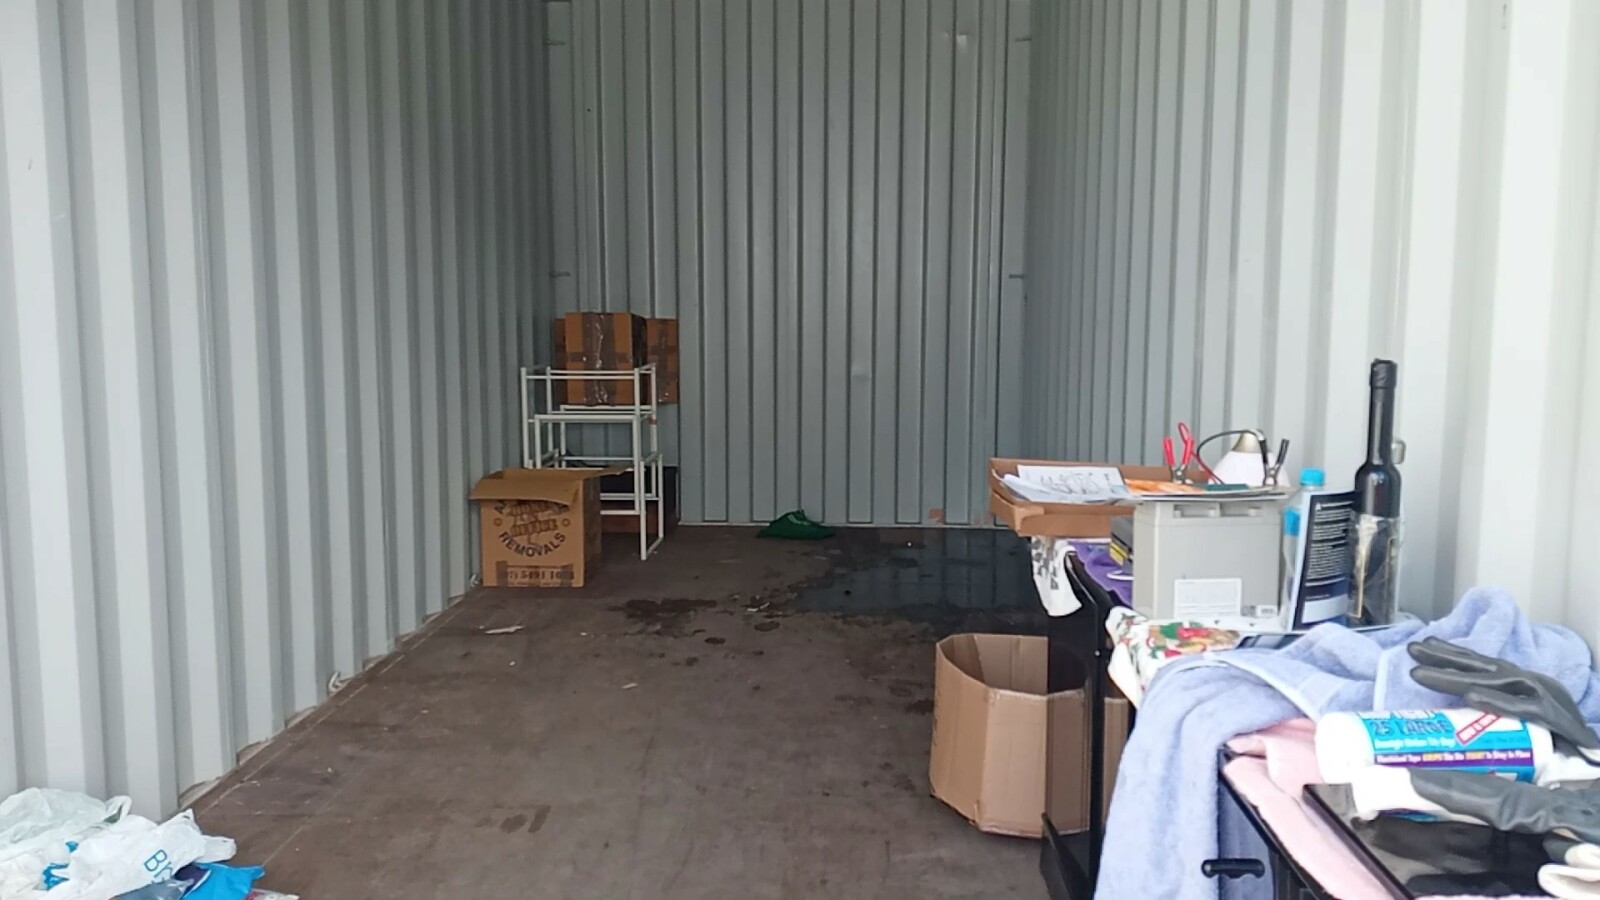 Floods and the Putrid Storage Container Smell